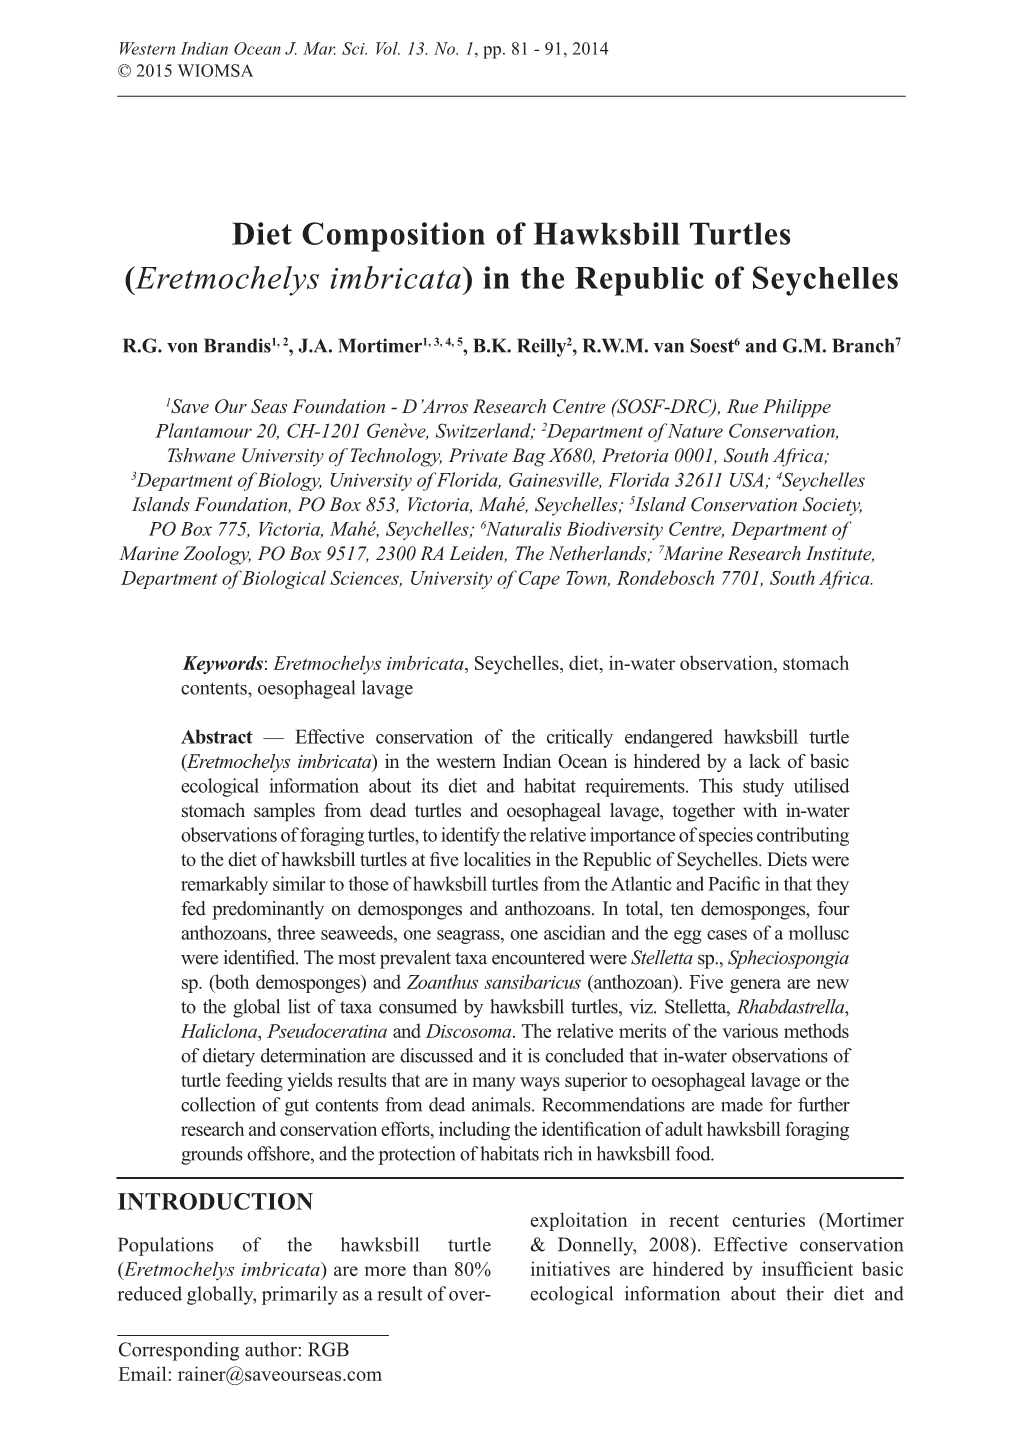 Diet Composition of Hawksbill Turtles (Eretmochelys Imbricata) in the Republic of Seychelles